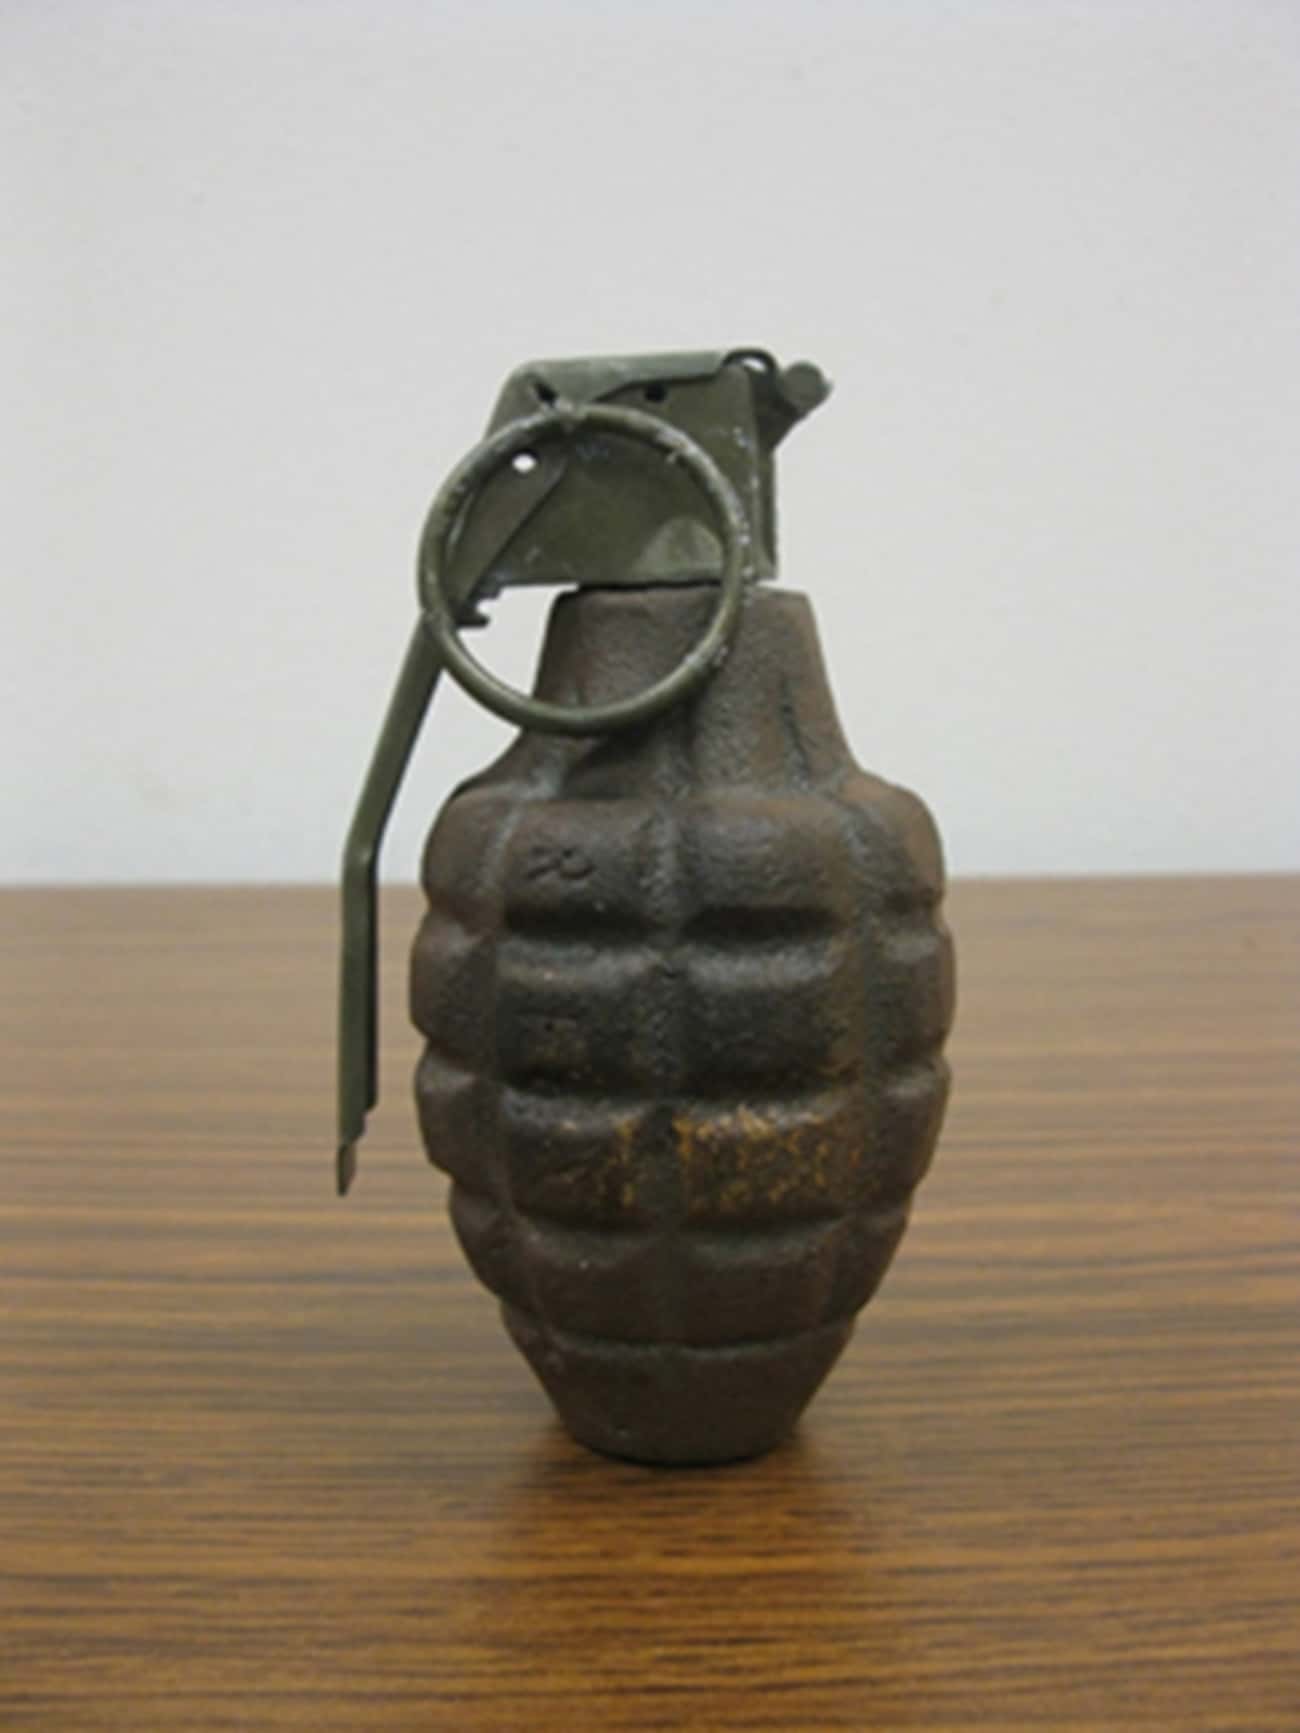 This Live Grenade